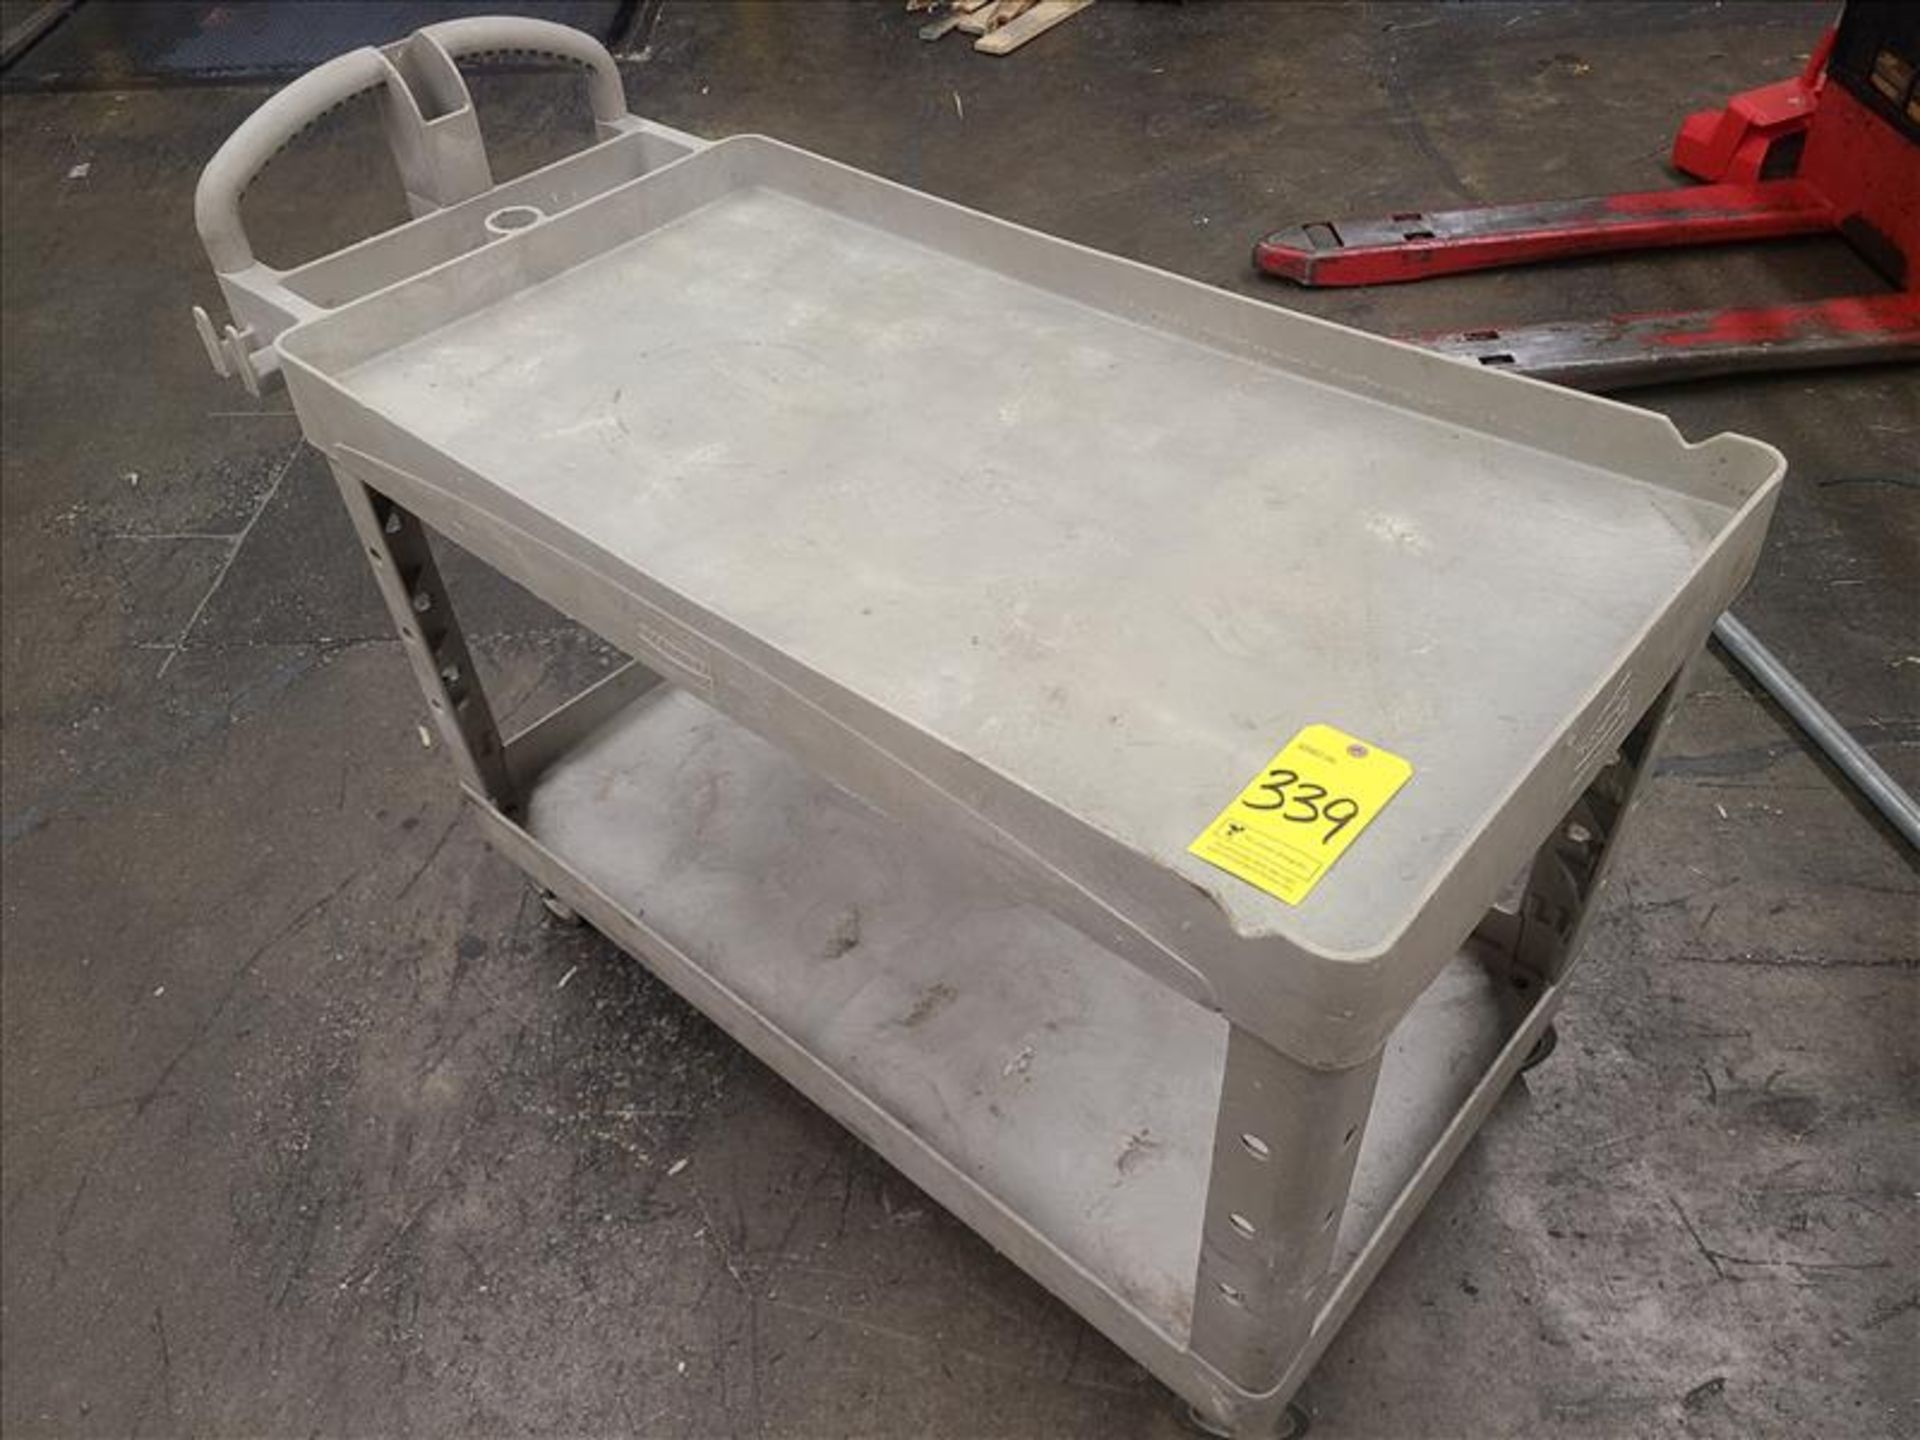 Rubbermaid Utility Cart [Loc.Finished Goods Shipping/Receiving]